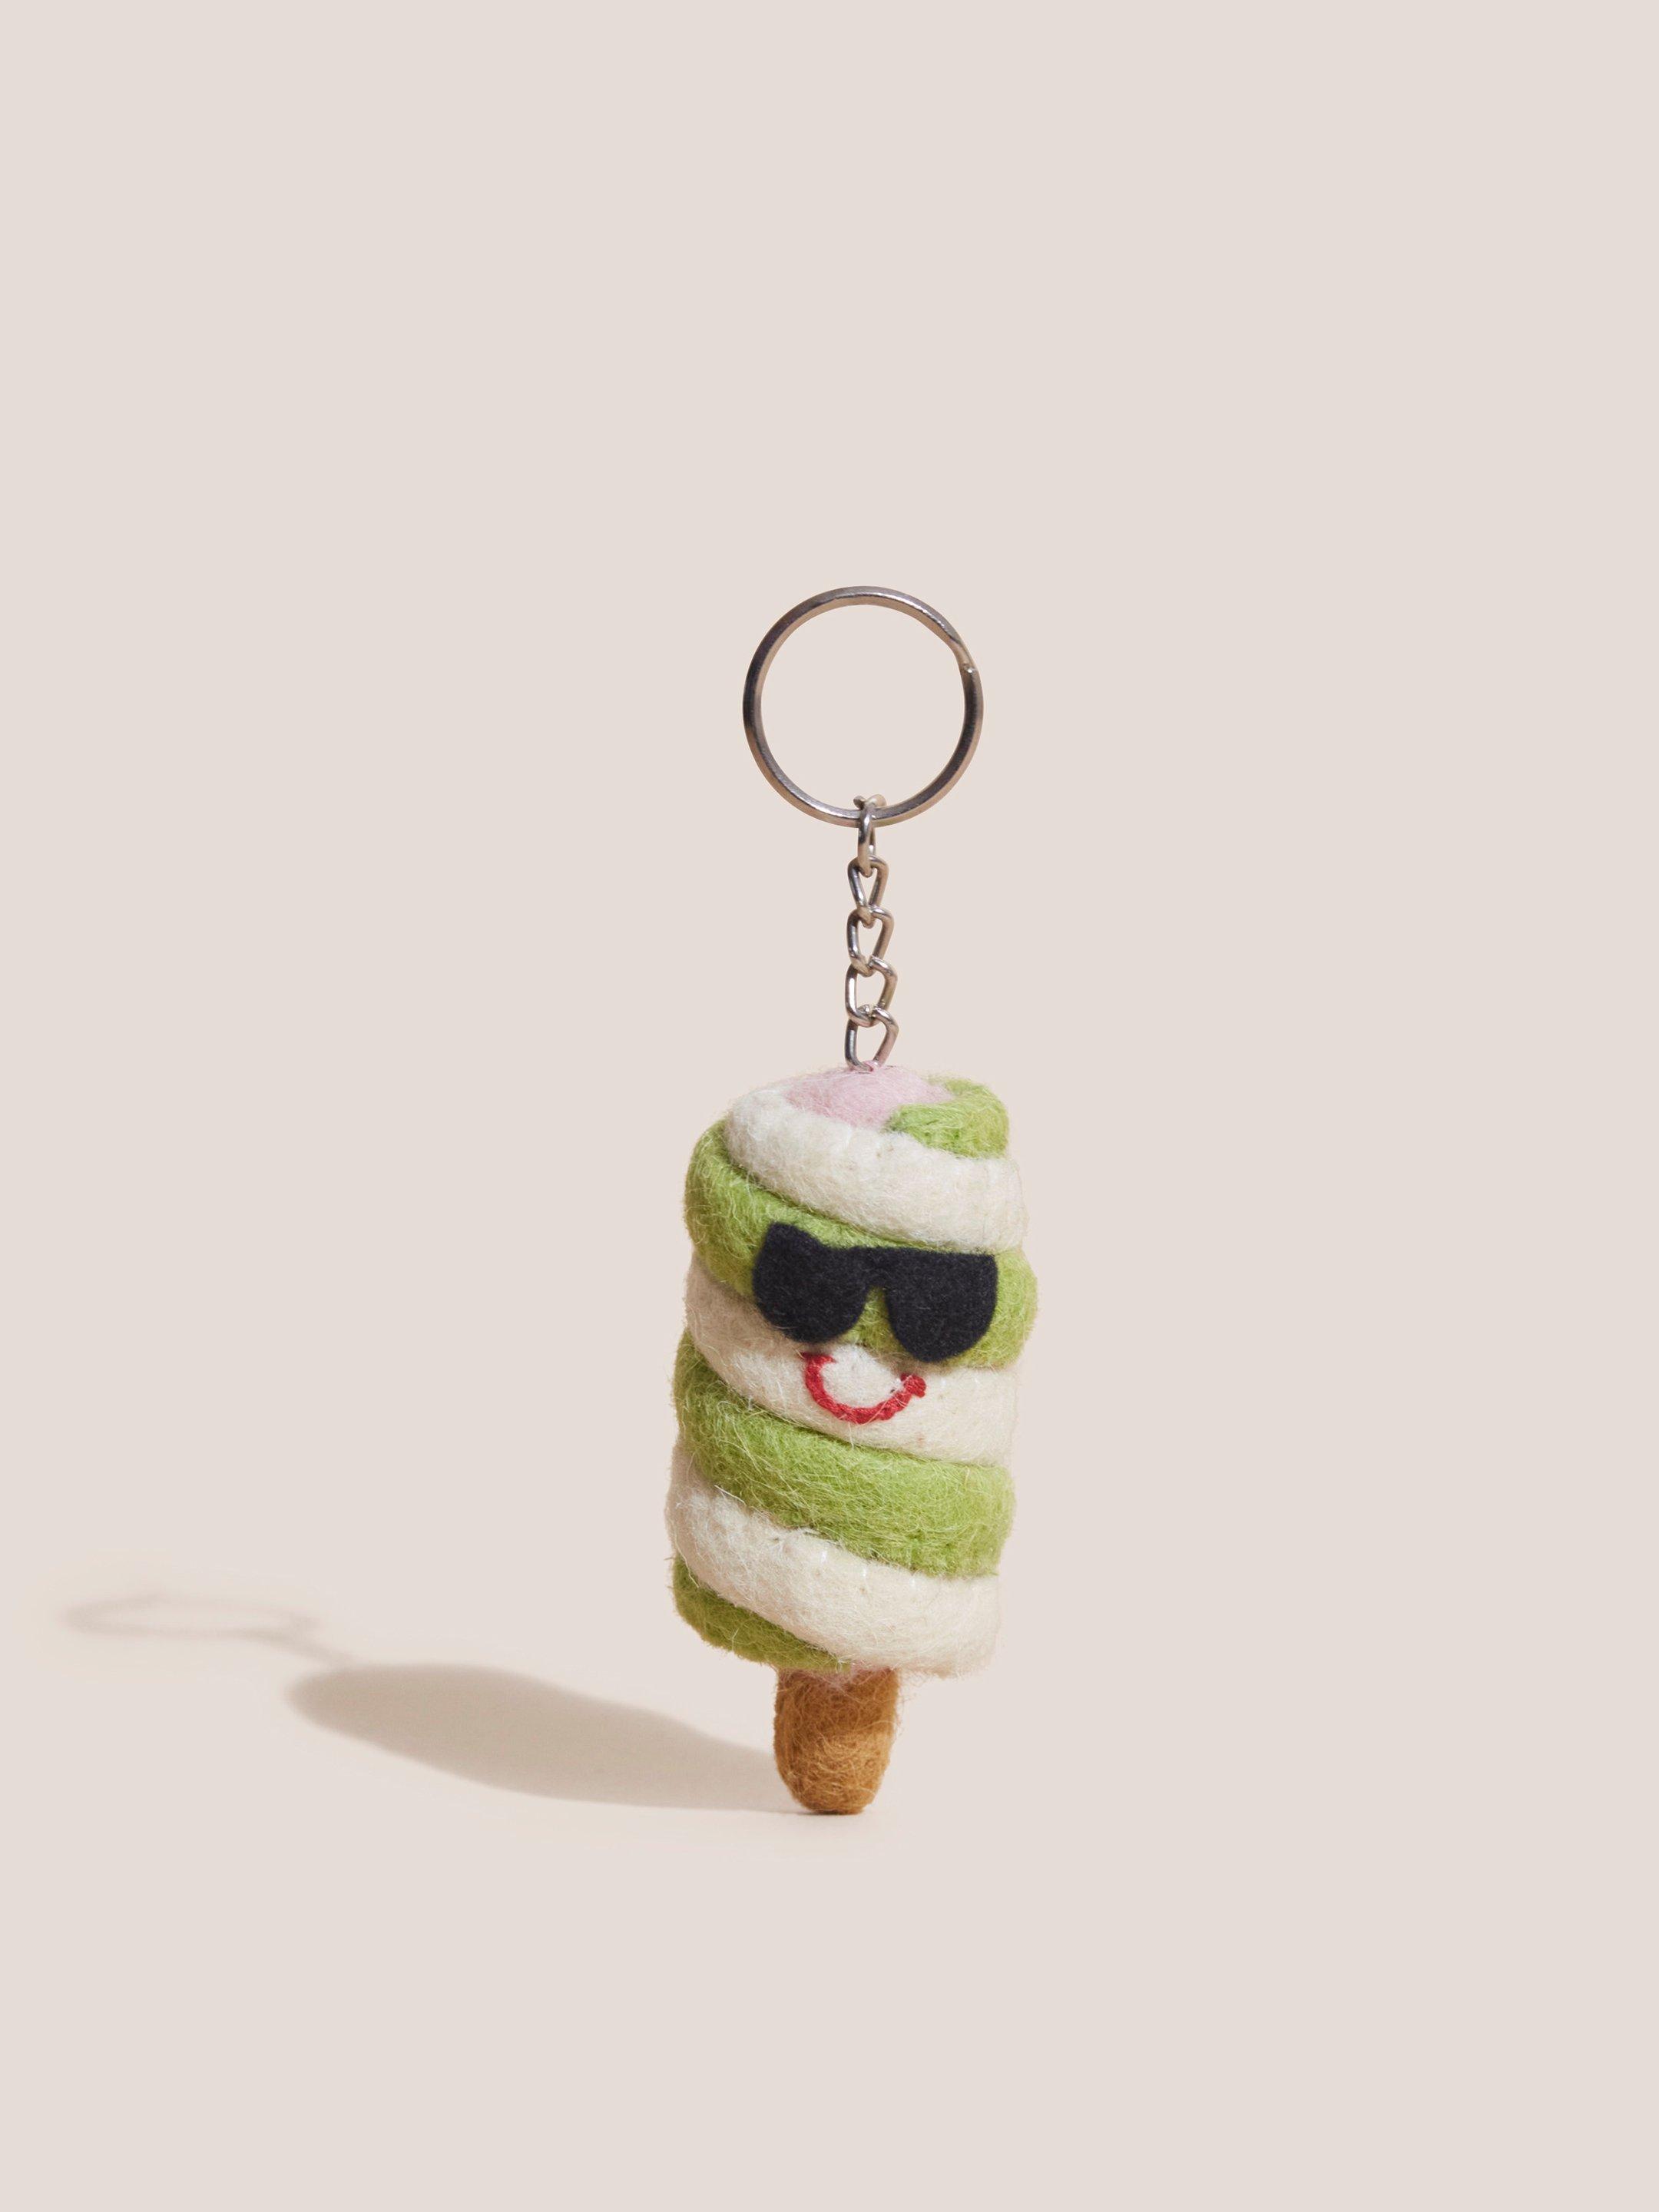 STAY COOL LOLLY KEYRING